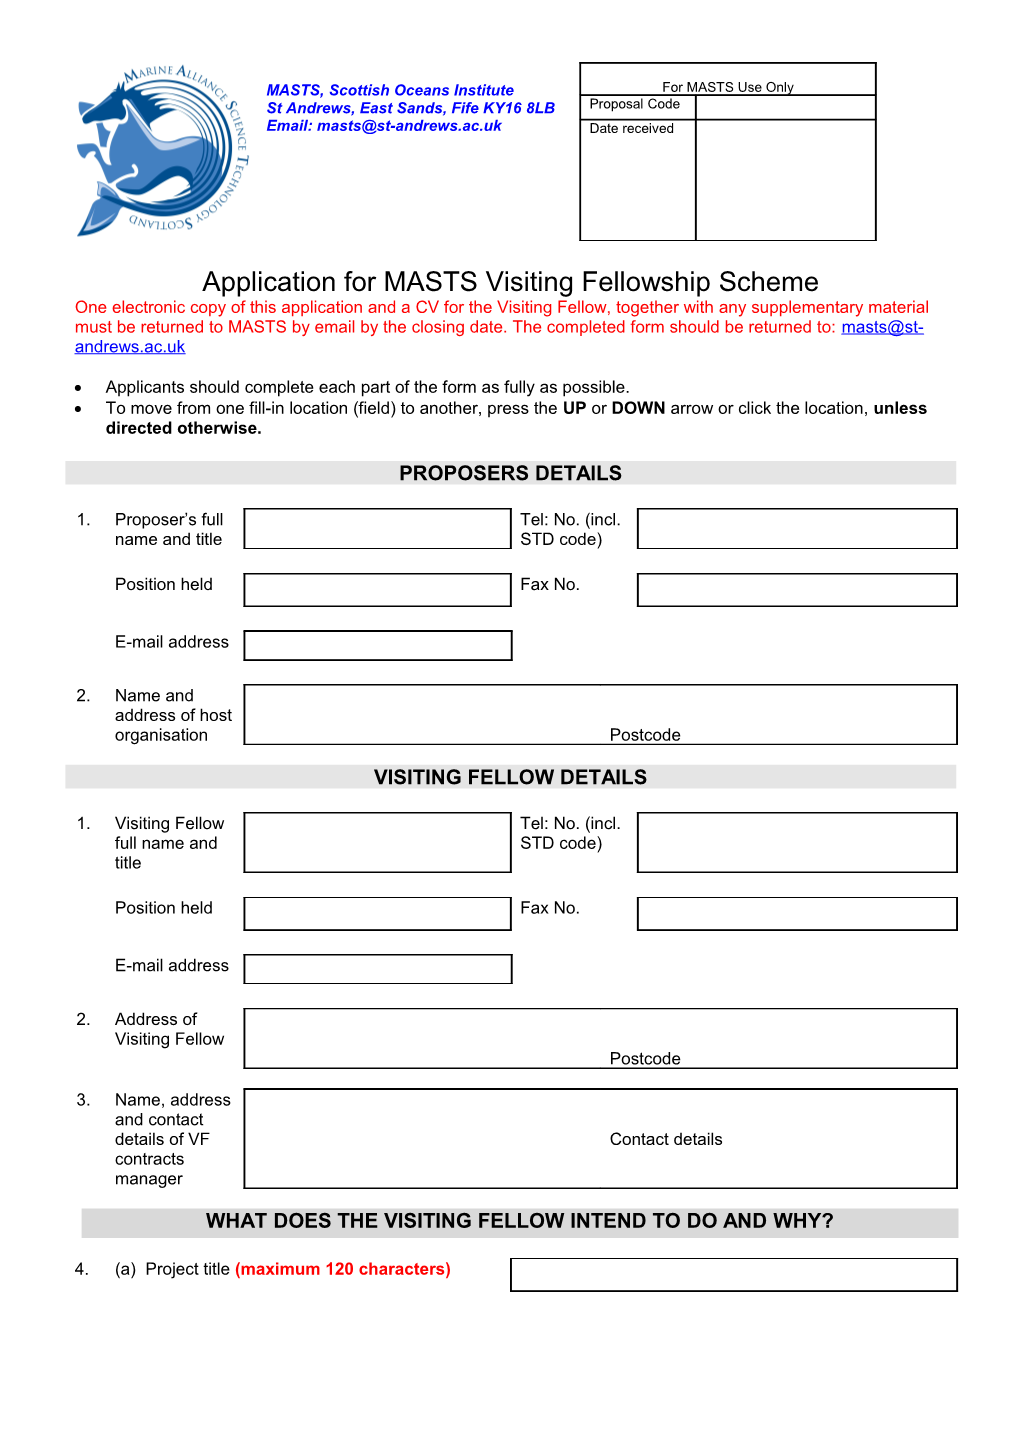 Application for MASTS Visiting Fellowship Scheme